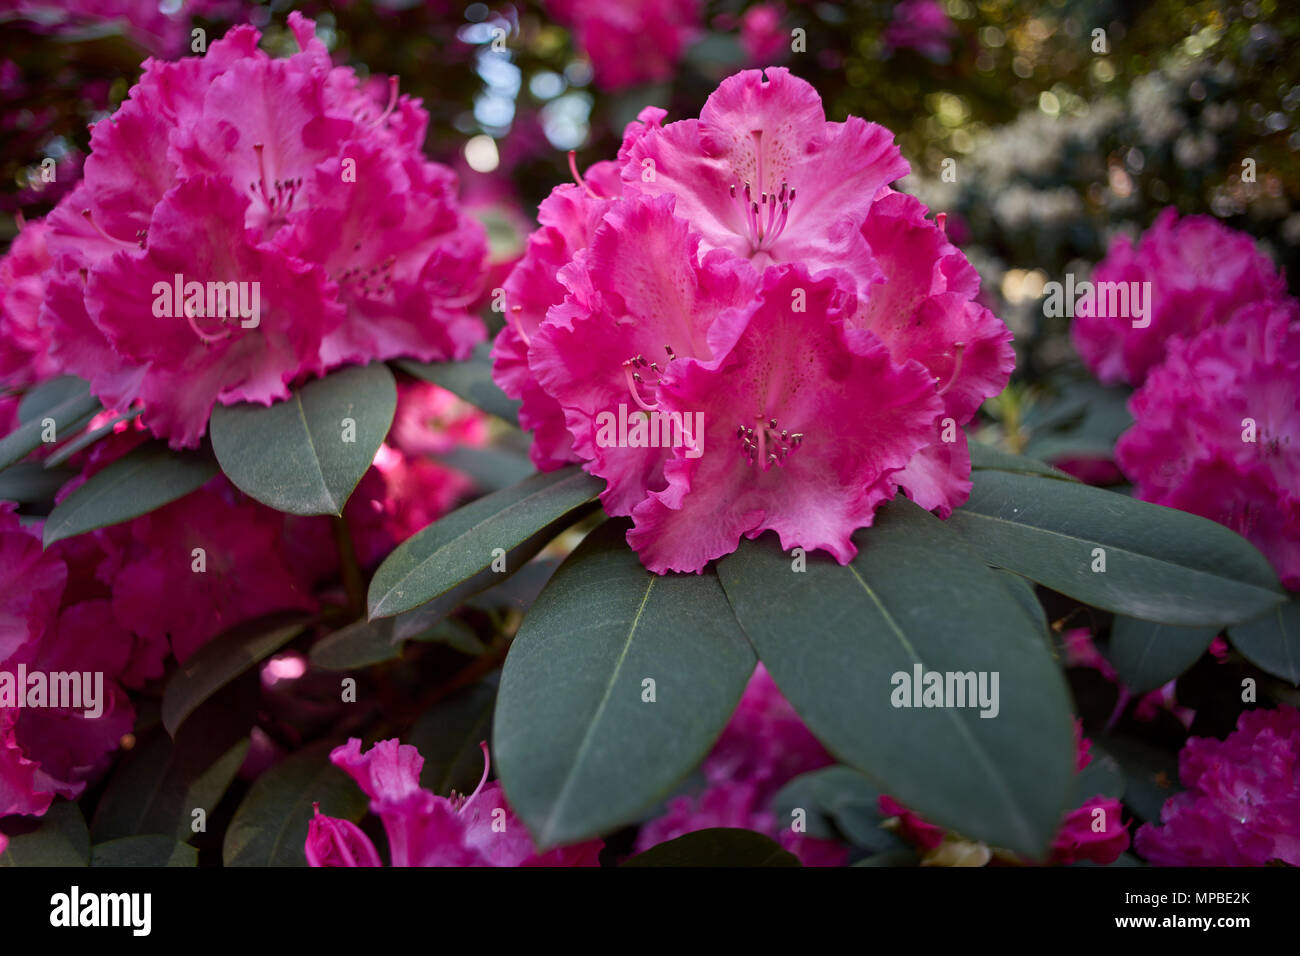 Rhododendron Germania pink blossom Lush rhododendron flowers close up Rhododendron blooming Rhododendron flowering spring Rhodendron blooms Stock Photo